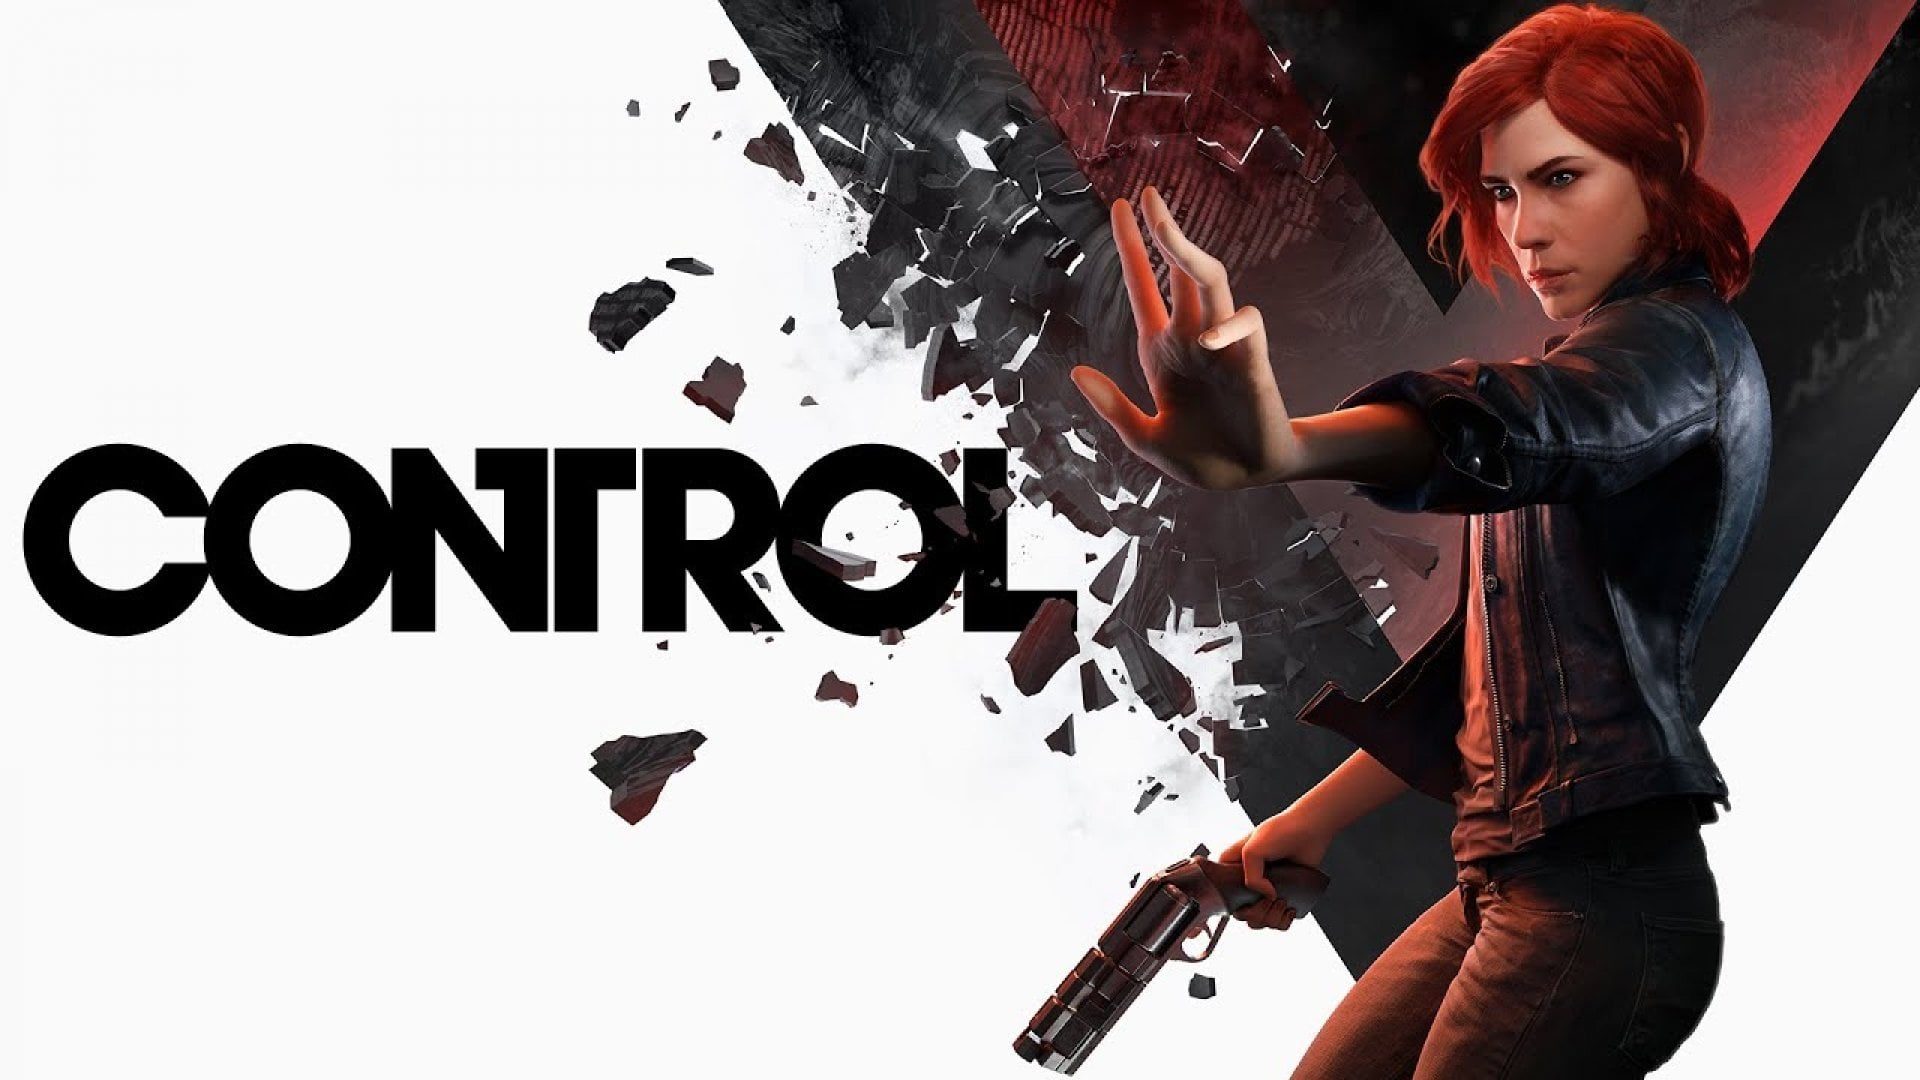 control-full-version-free-download-6155735